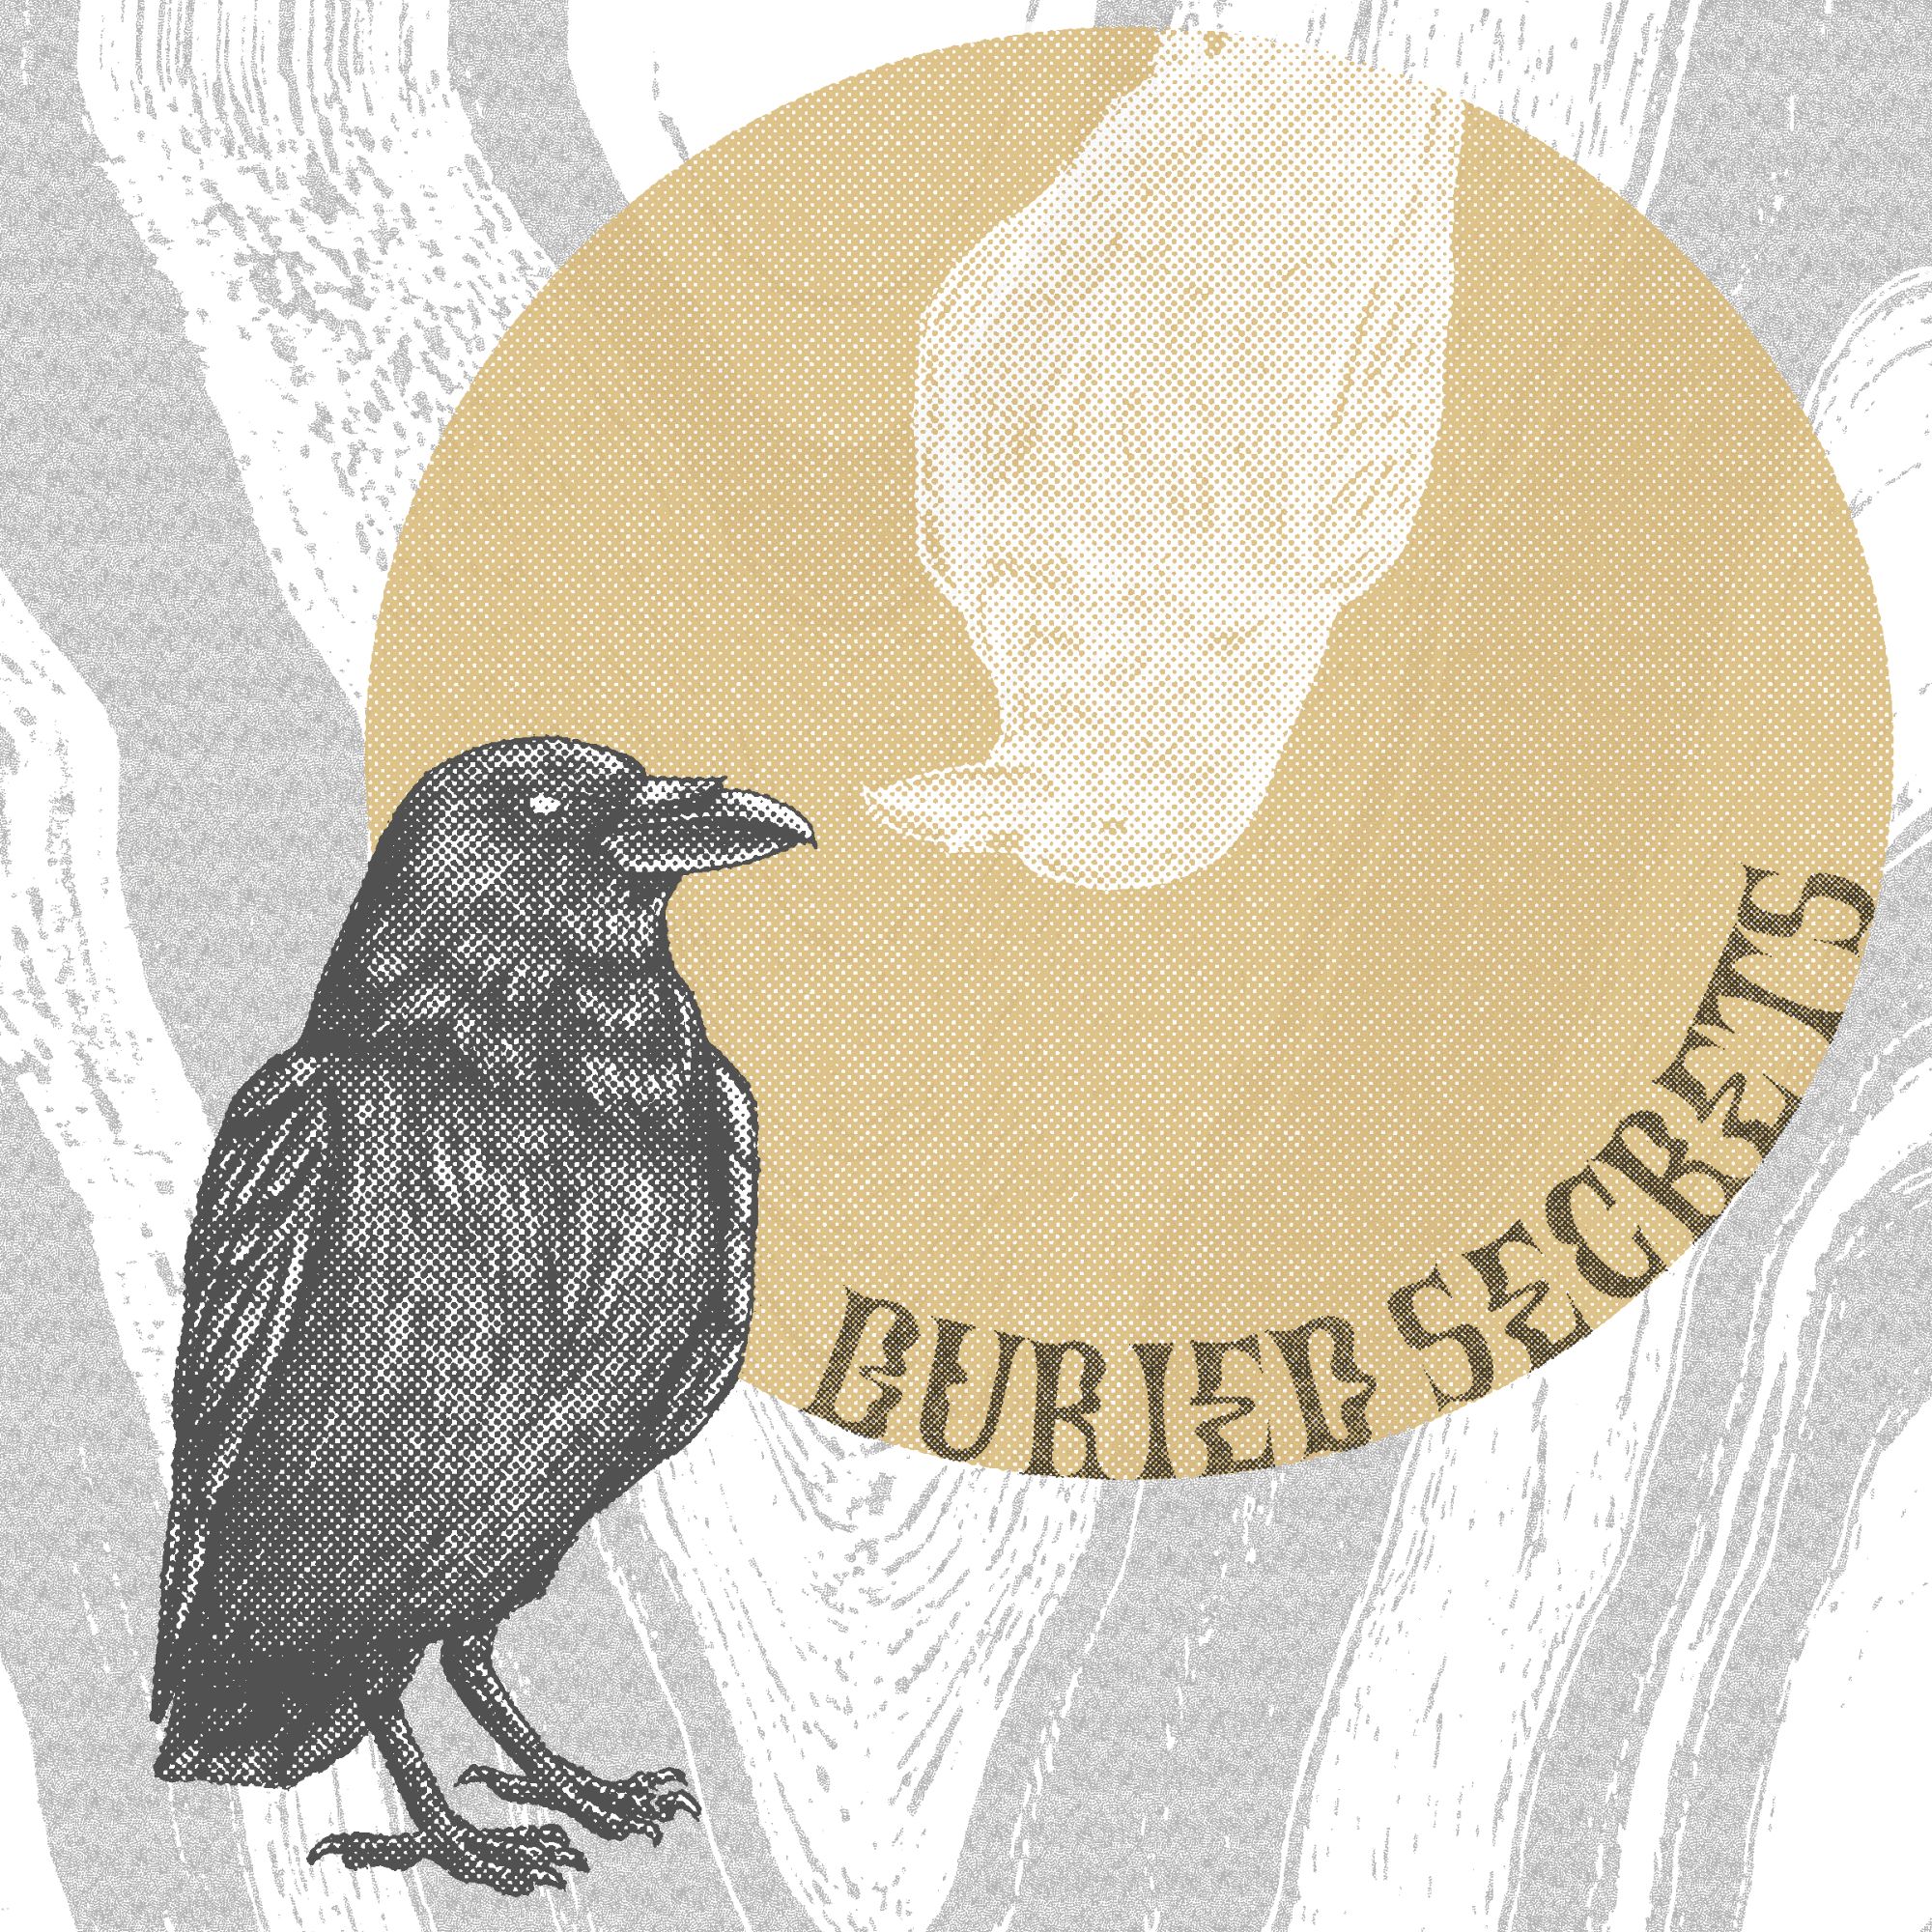 A halftone version of the Buried Secrets Podcast logo with a black crow and a white crow inverted and facing each other.